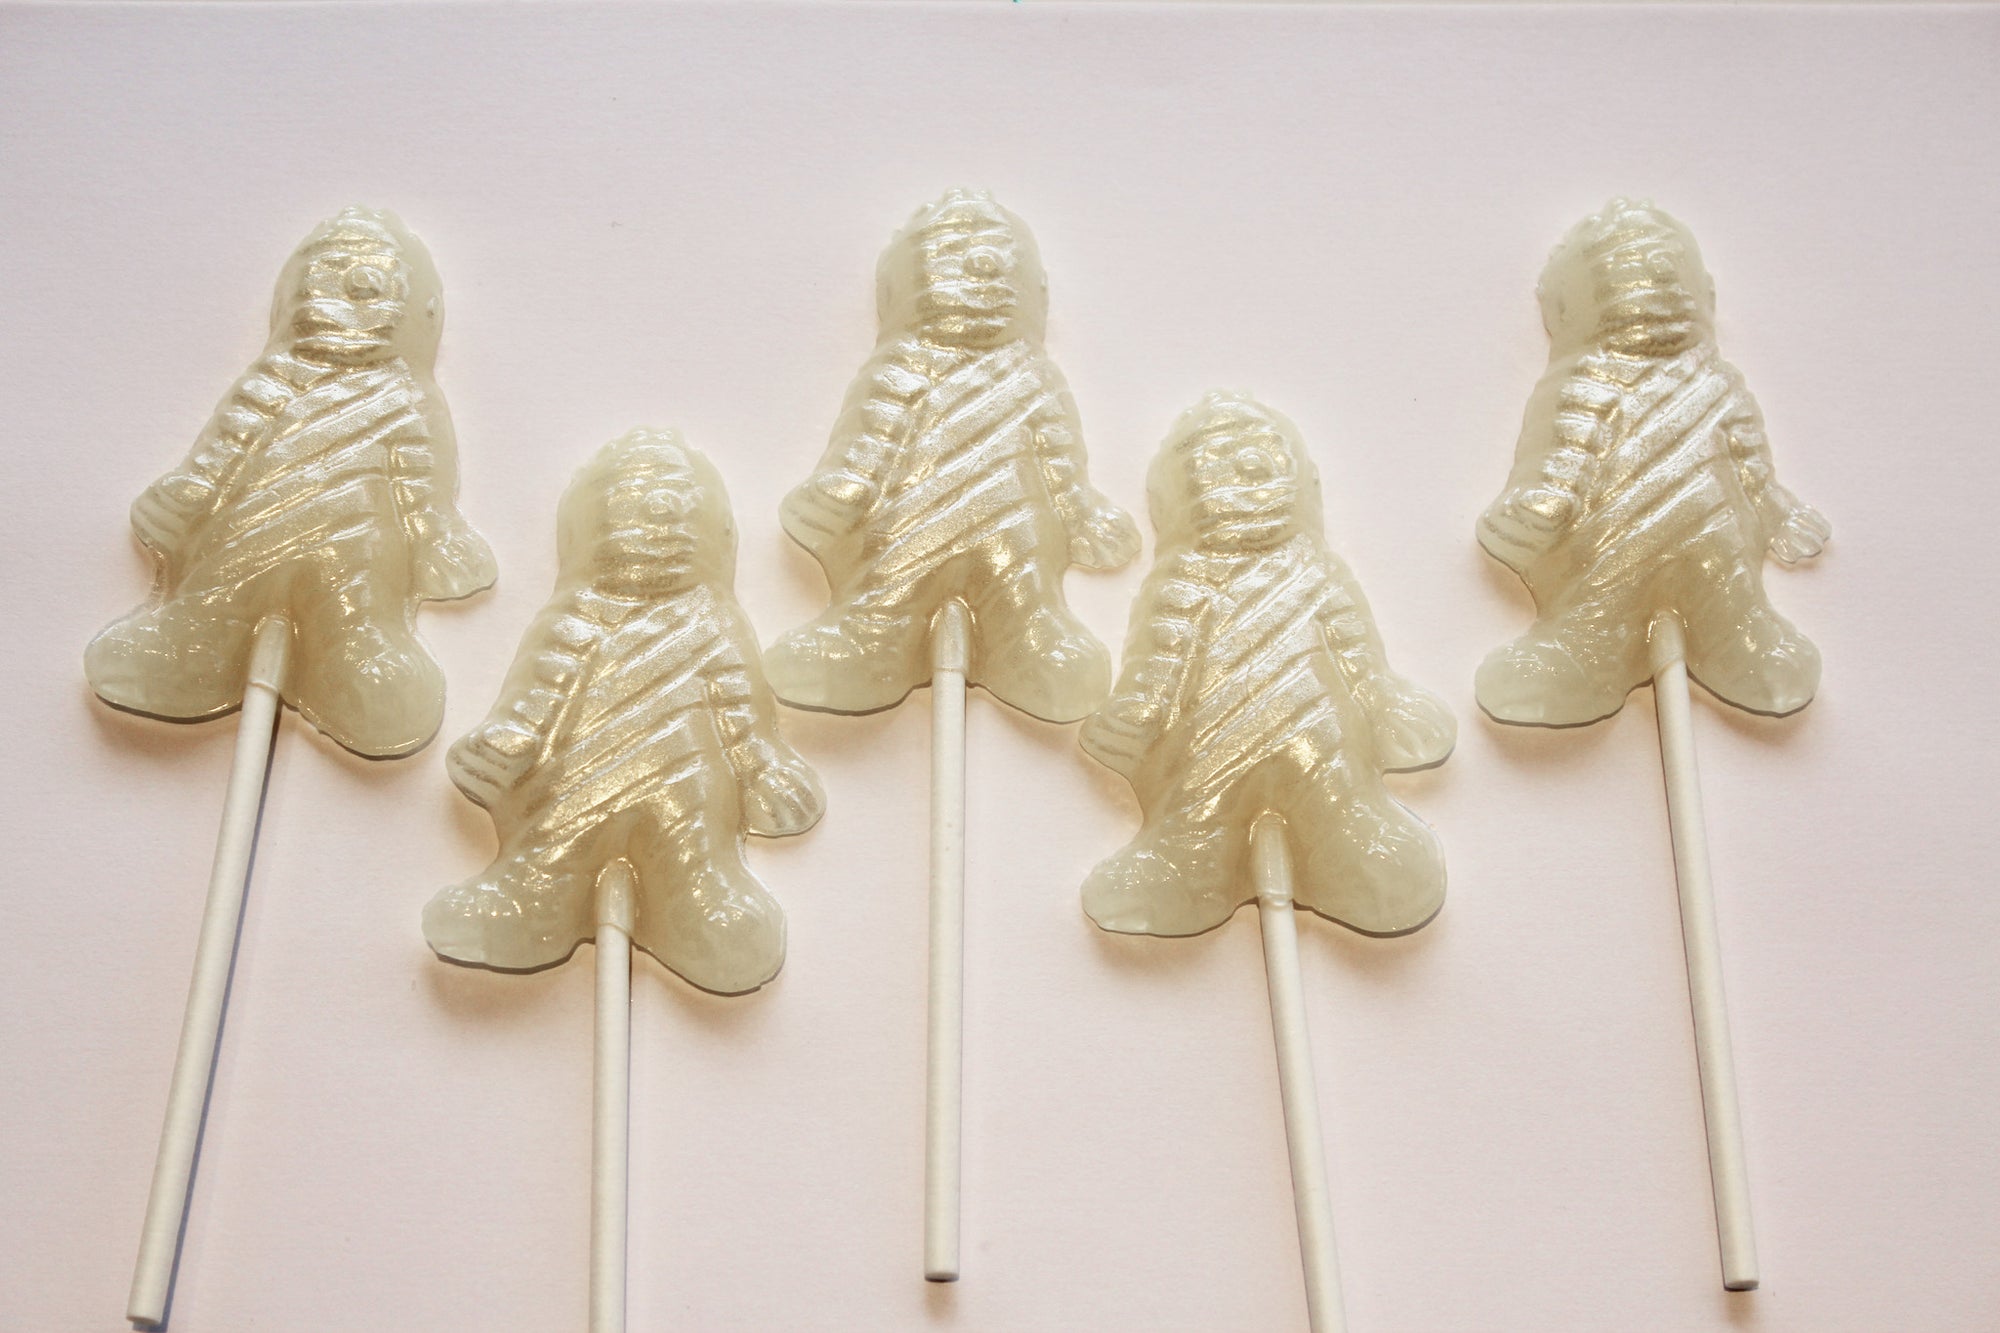 Mummy Shaped Lollipops 6-piece set by I Want Candy!